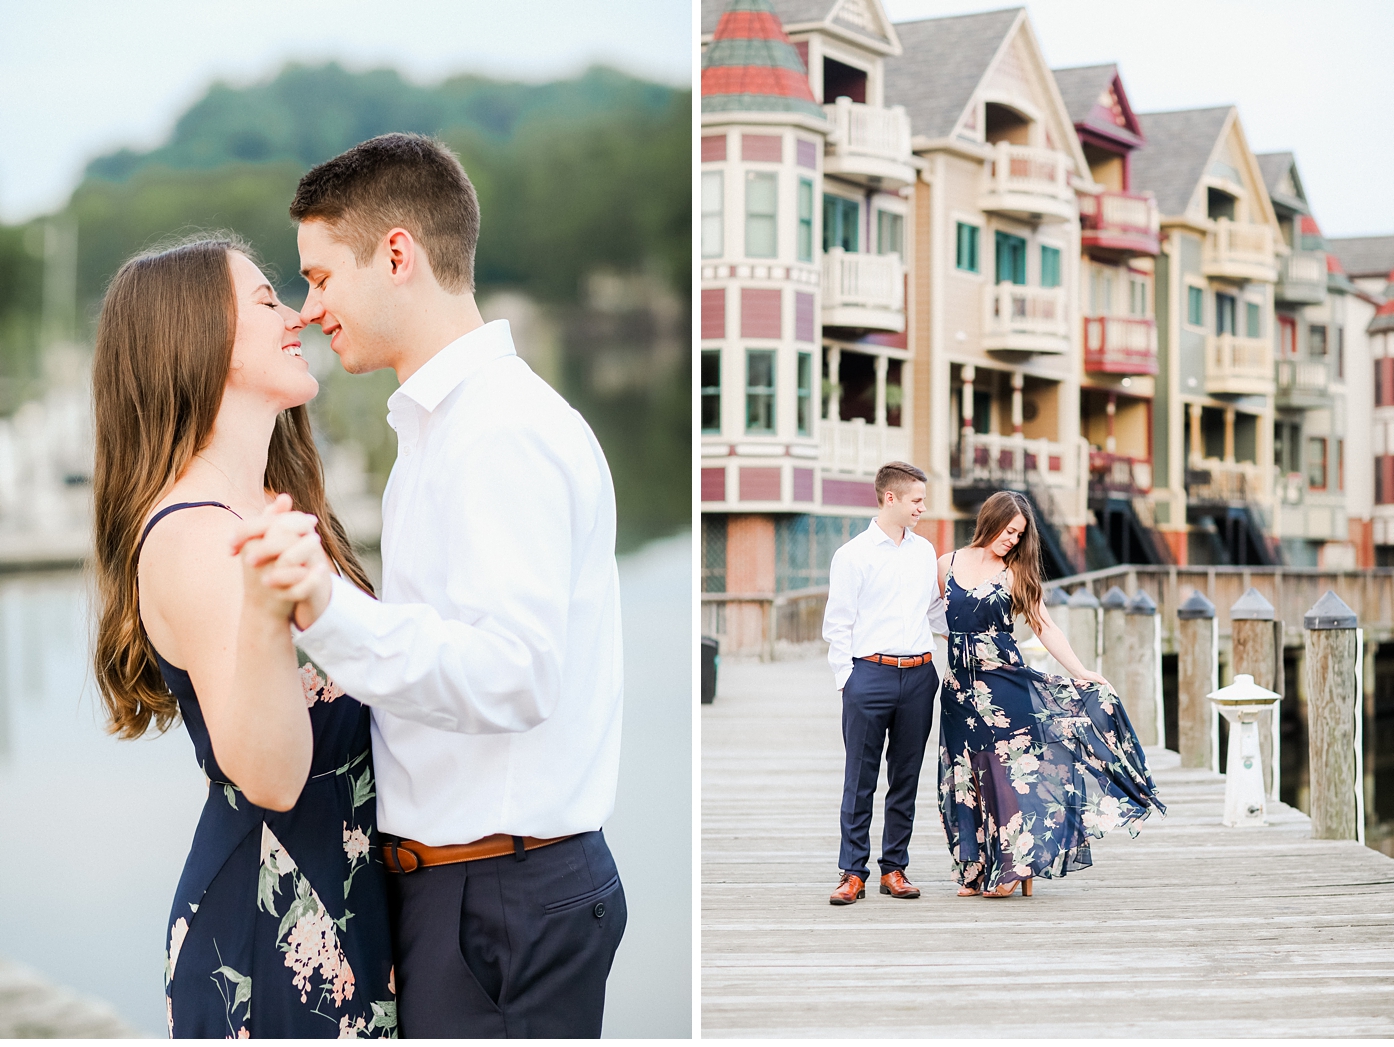 Sunrise Engagement Session in Occoquan Virginia by Alisandra Photography